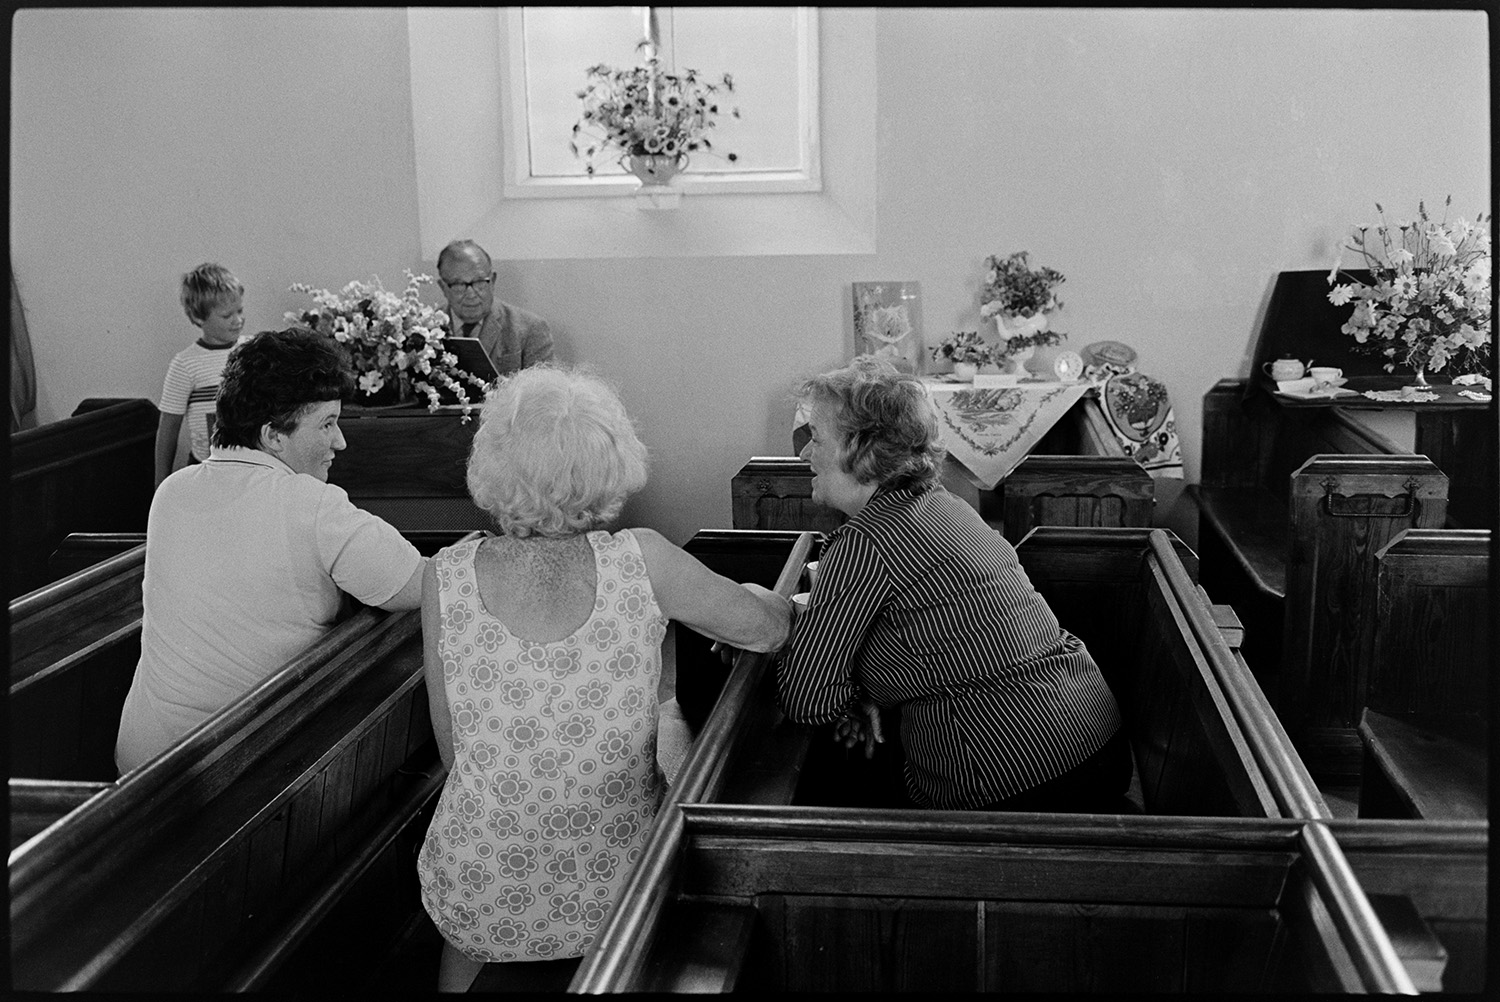 Baptist Chapel flower festival Minister playing organ, harmonium, mugs and biscuits, teas.
[Three women sitting in pews chatting at the Flower Festival in Dolton Baptist Chapel, with floral displays in the background. Minister Oliver is playing the organ or harmonium and a boy is turning the pages of the music for him.]